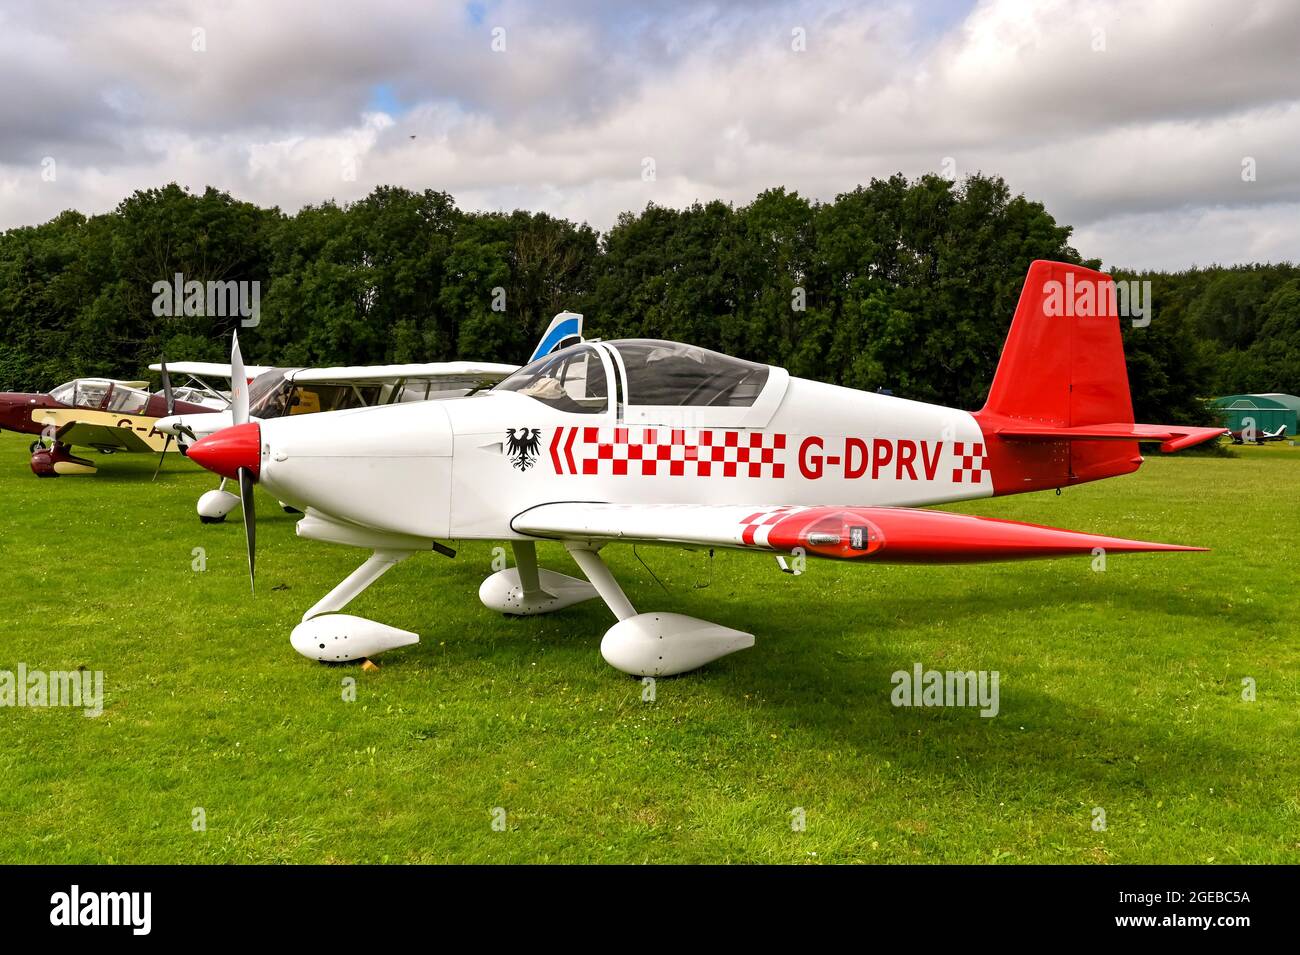 Popham, near Basingstoke, England - August 2021: Van's RV private aeroplane parked on the grass airfield at Popham. Stock Photo